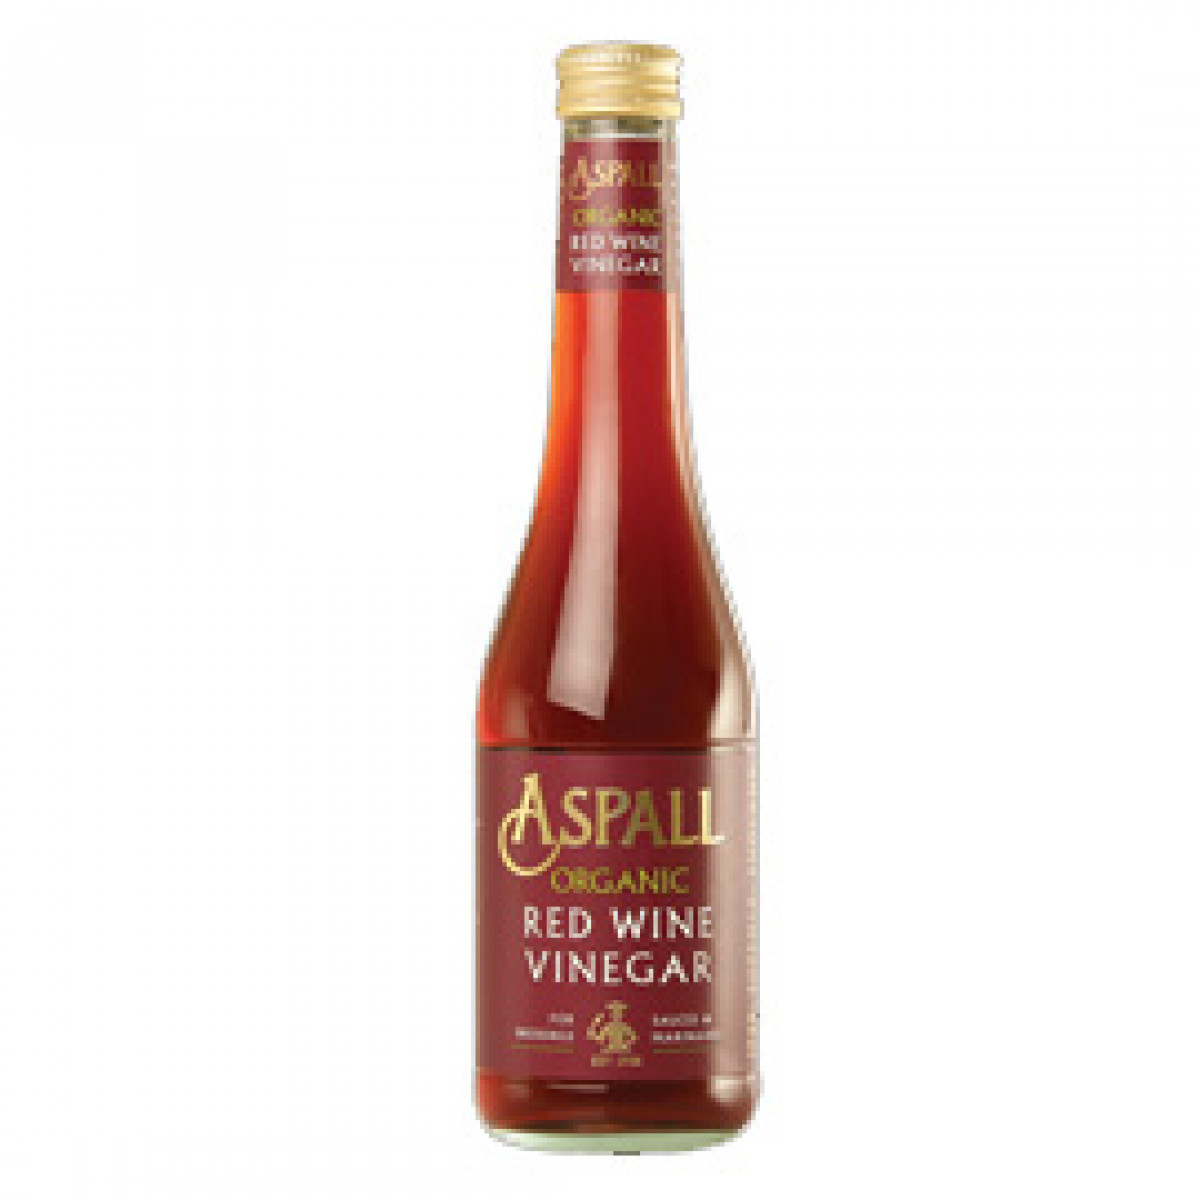 Product picture for Red Wine Vinegar